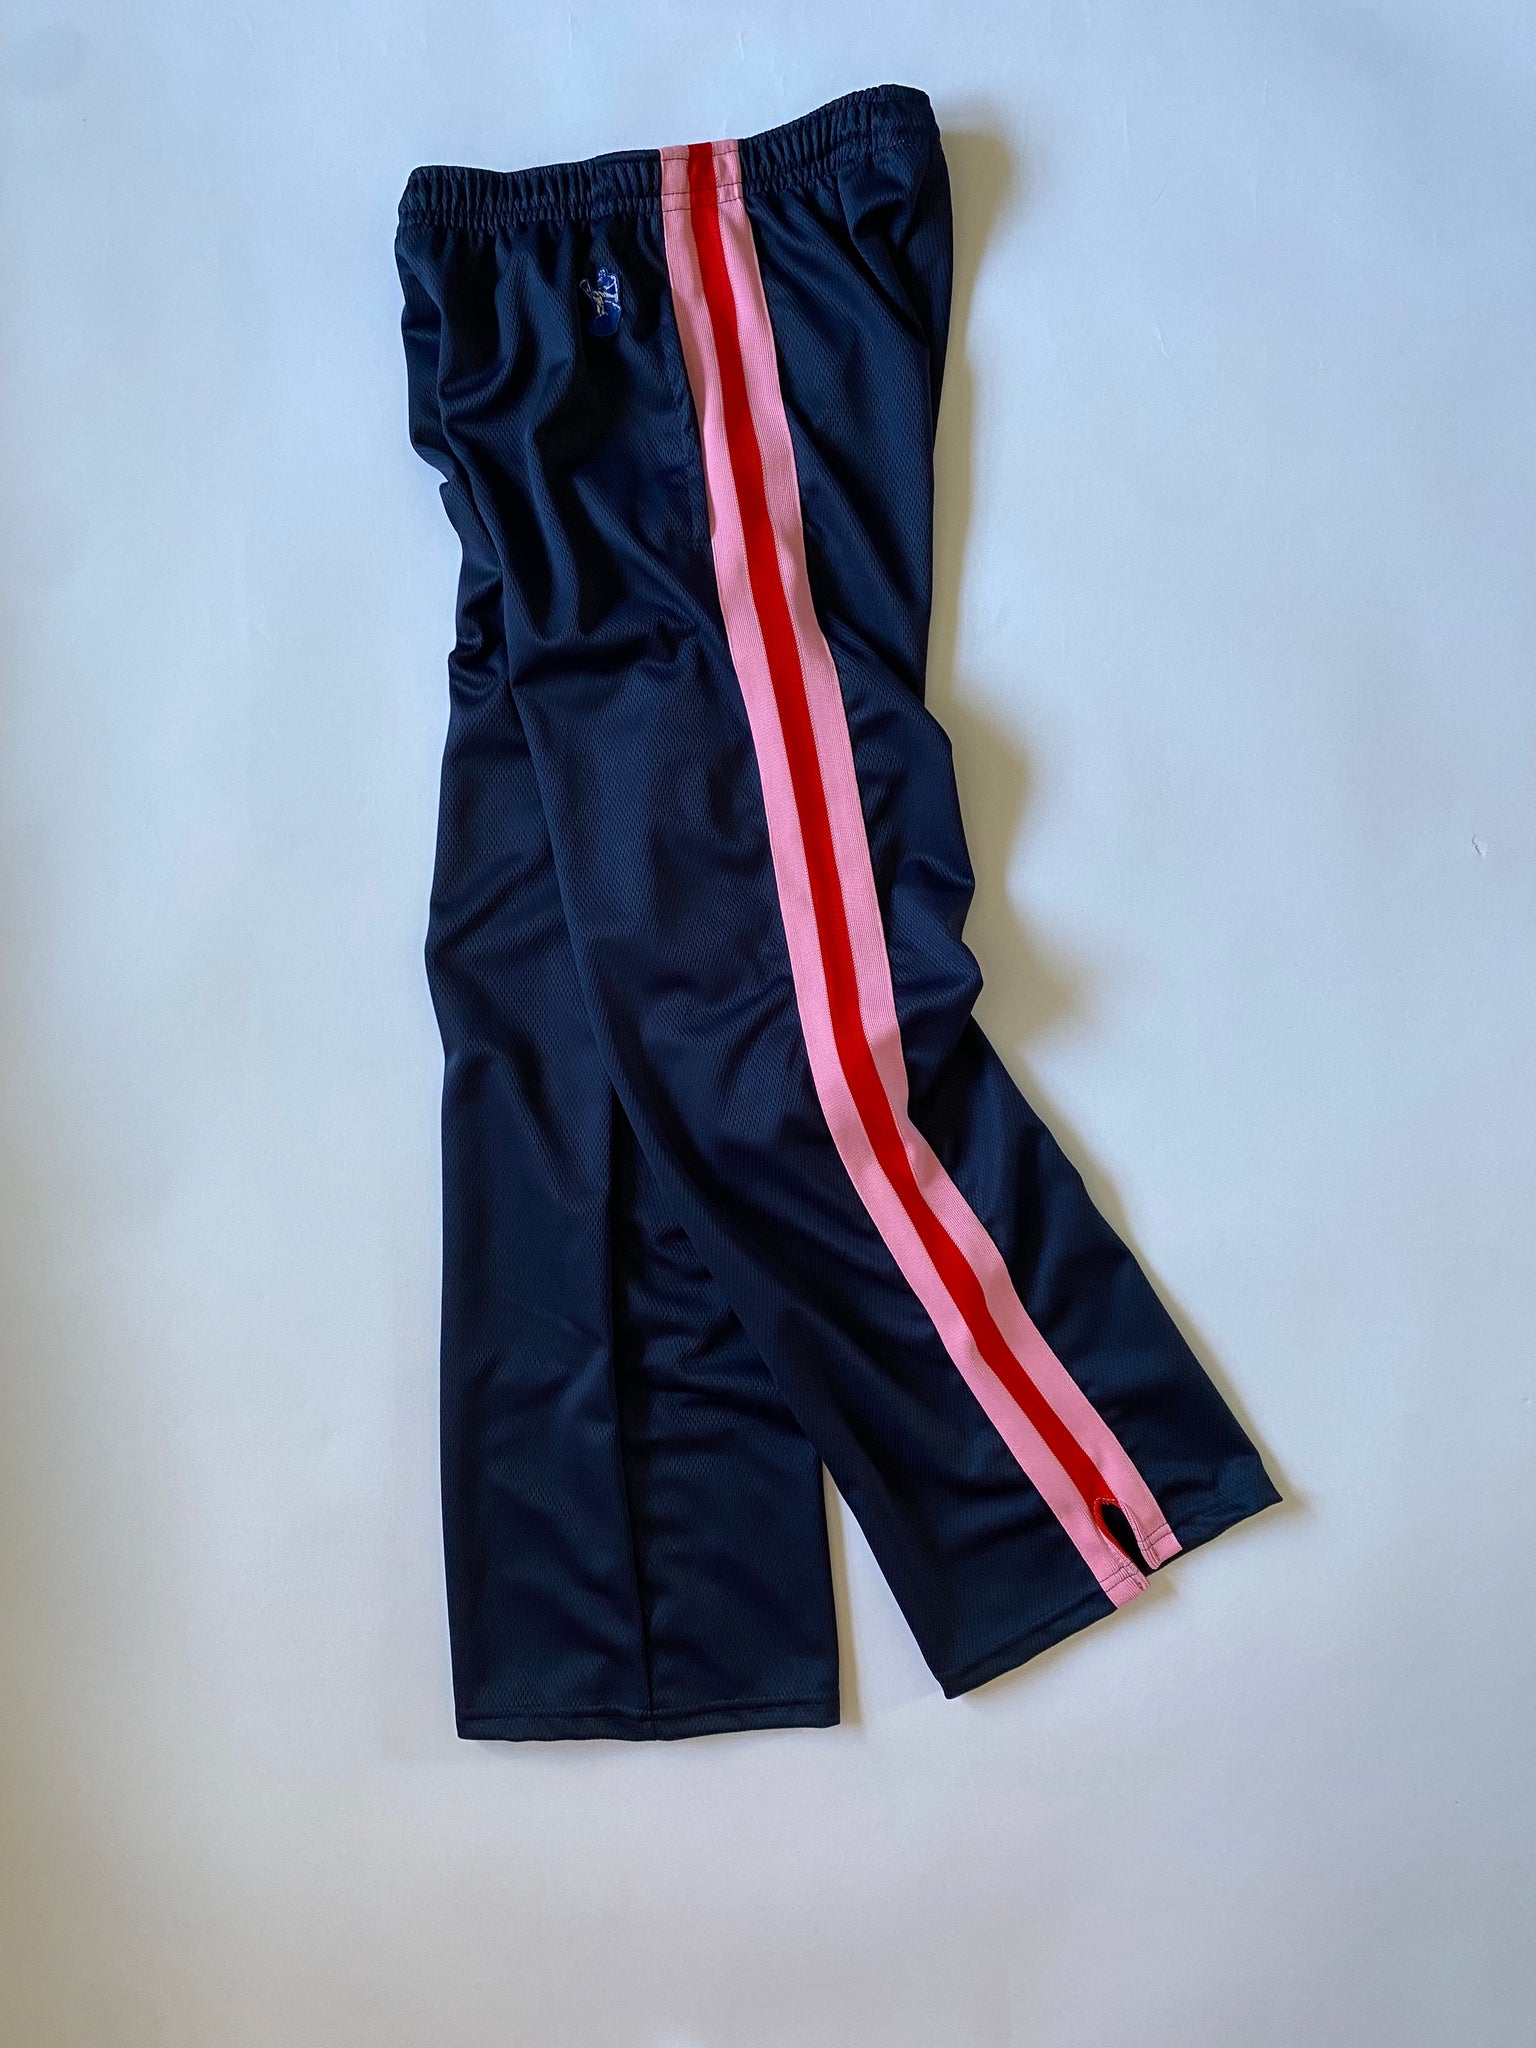 RLB LAX PANT in Navy Miracle Mesh* w/ pink, red, pink stripes